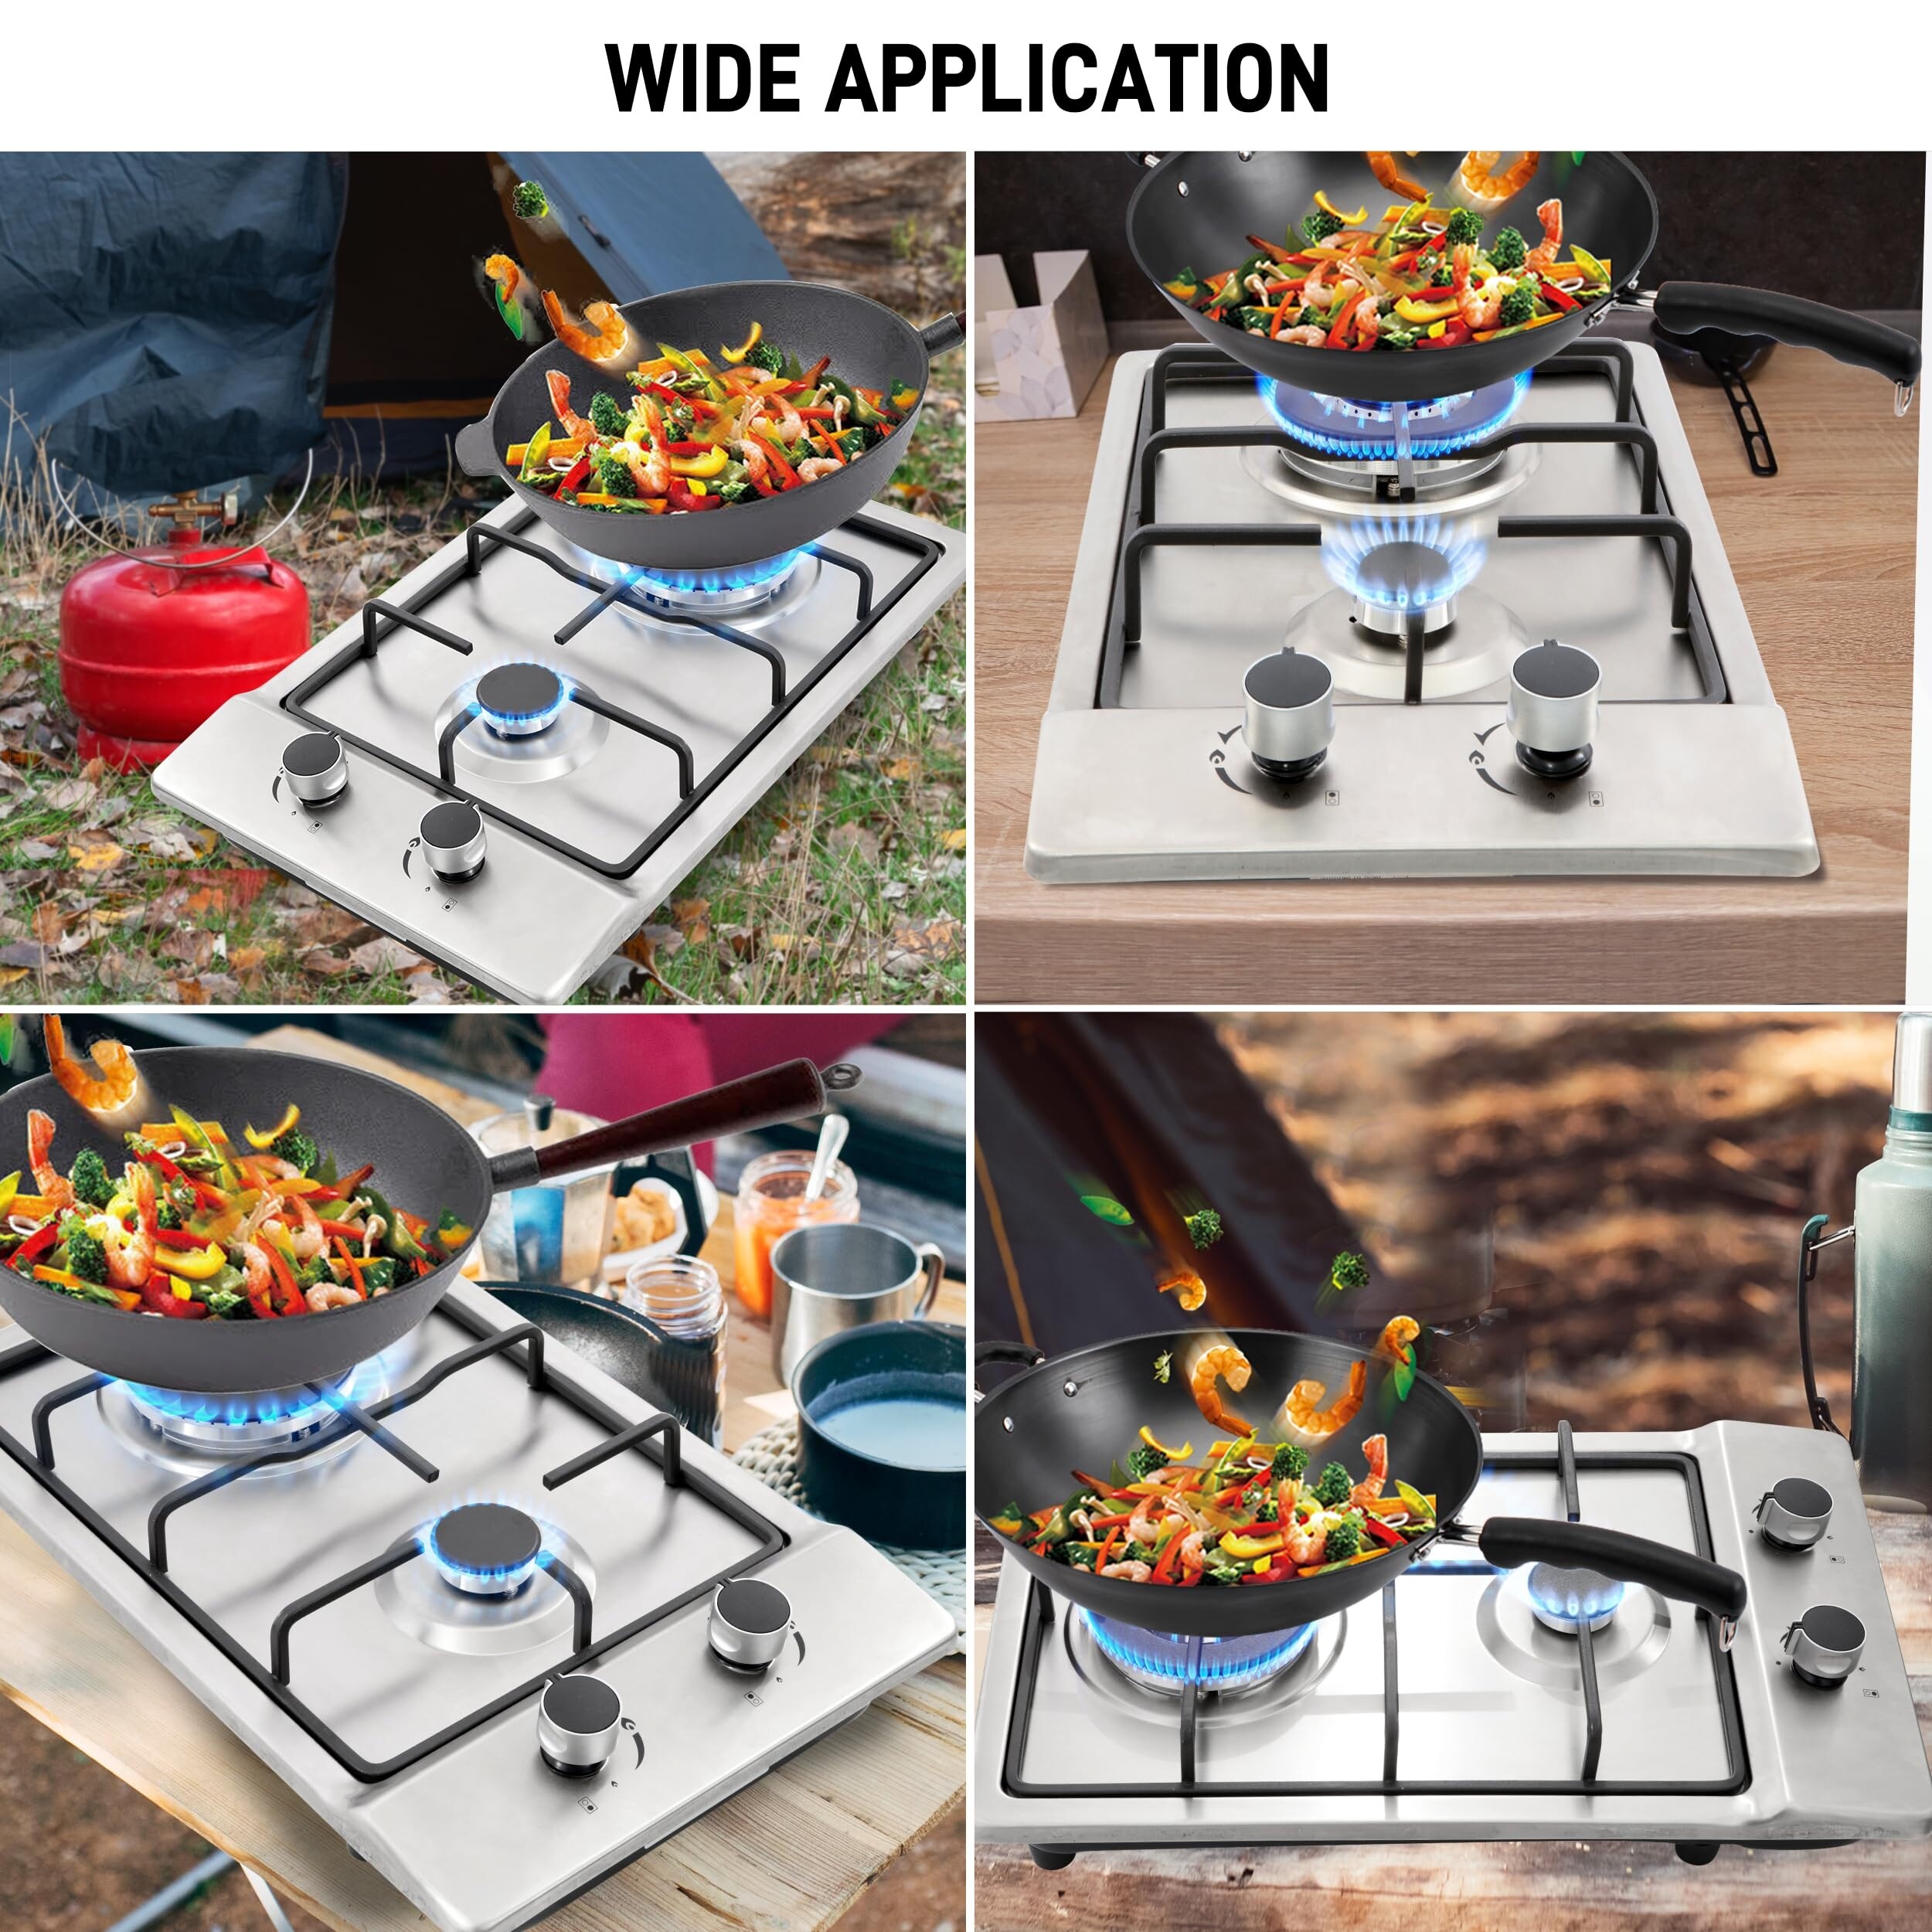 https://ak1.ostkcdn.com/images/products/is/images/direct/4345985594885b77bfa46fd788a9fafd3fce60dc/12%22-Gas-Cooktops%2C-2-Burner-Drop-in-Propane-Natural-Gas-Cooker%2C-12-Inch-Stainless-Steel-Gas-Stove-Top-Dual-Fuel-%2812Wx20L%29.jpg